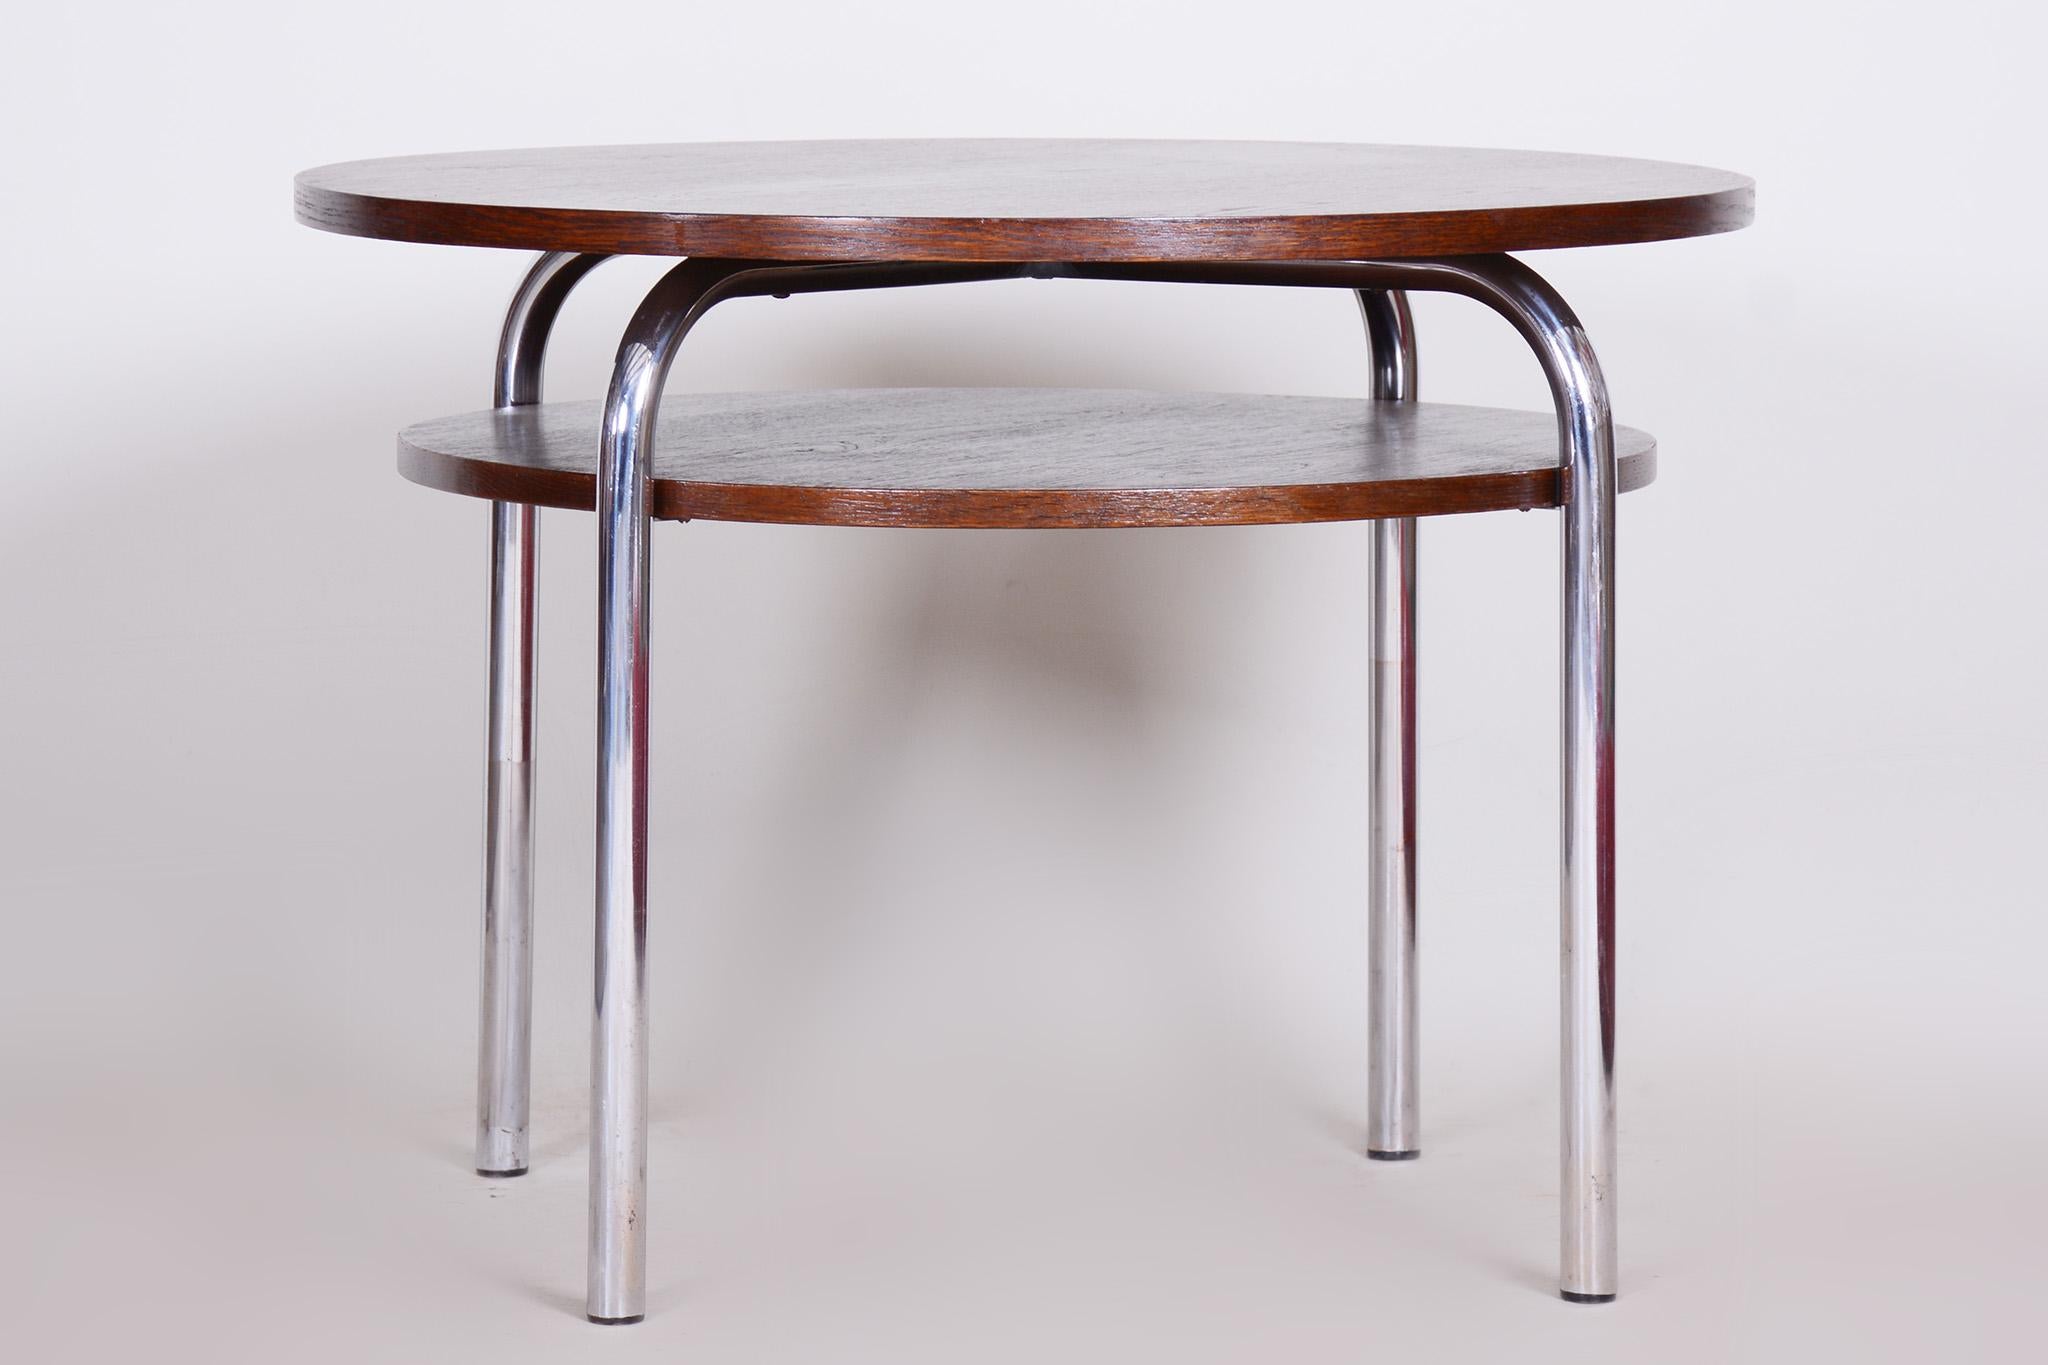 Bauhaus Vichr & Co Table Made in 1930s Czechia, Original Condition For Sale